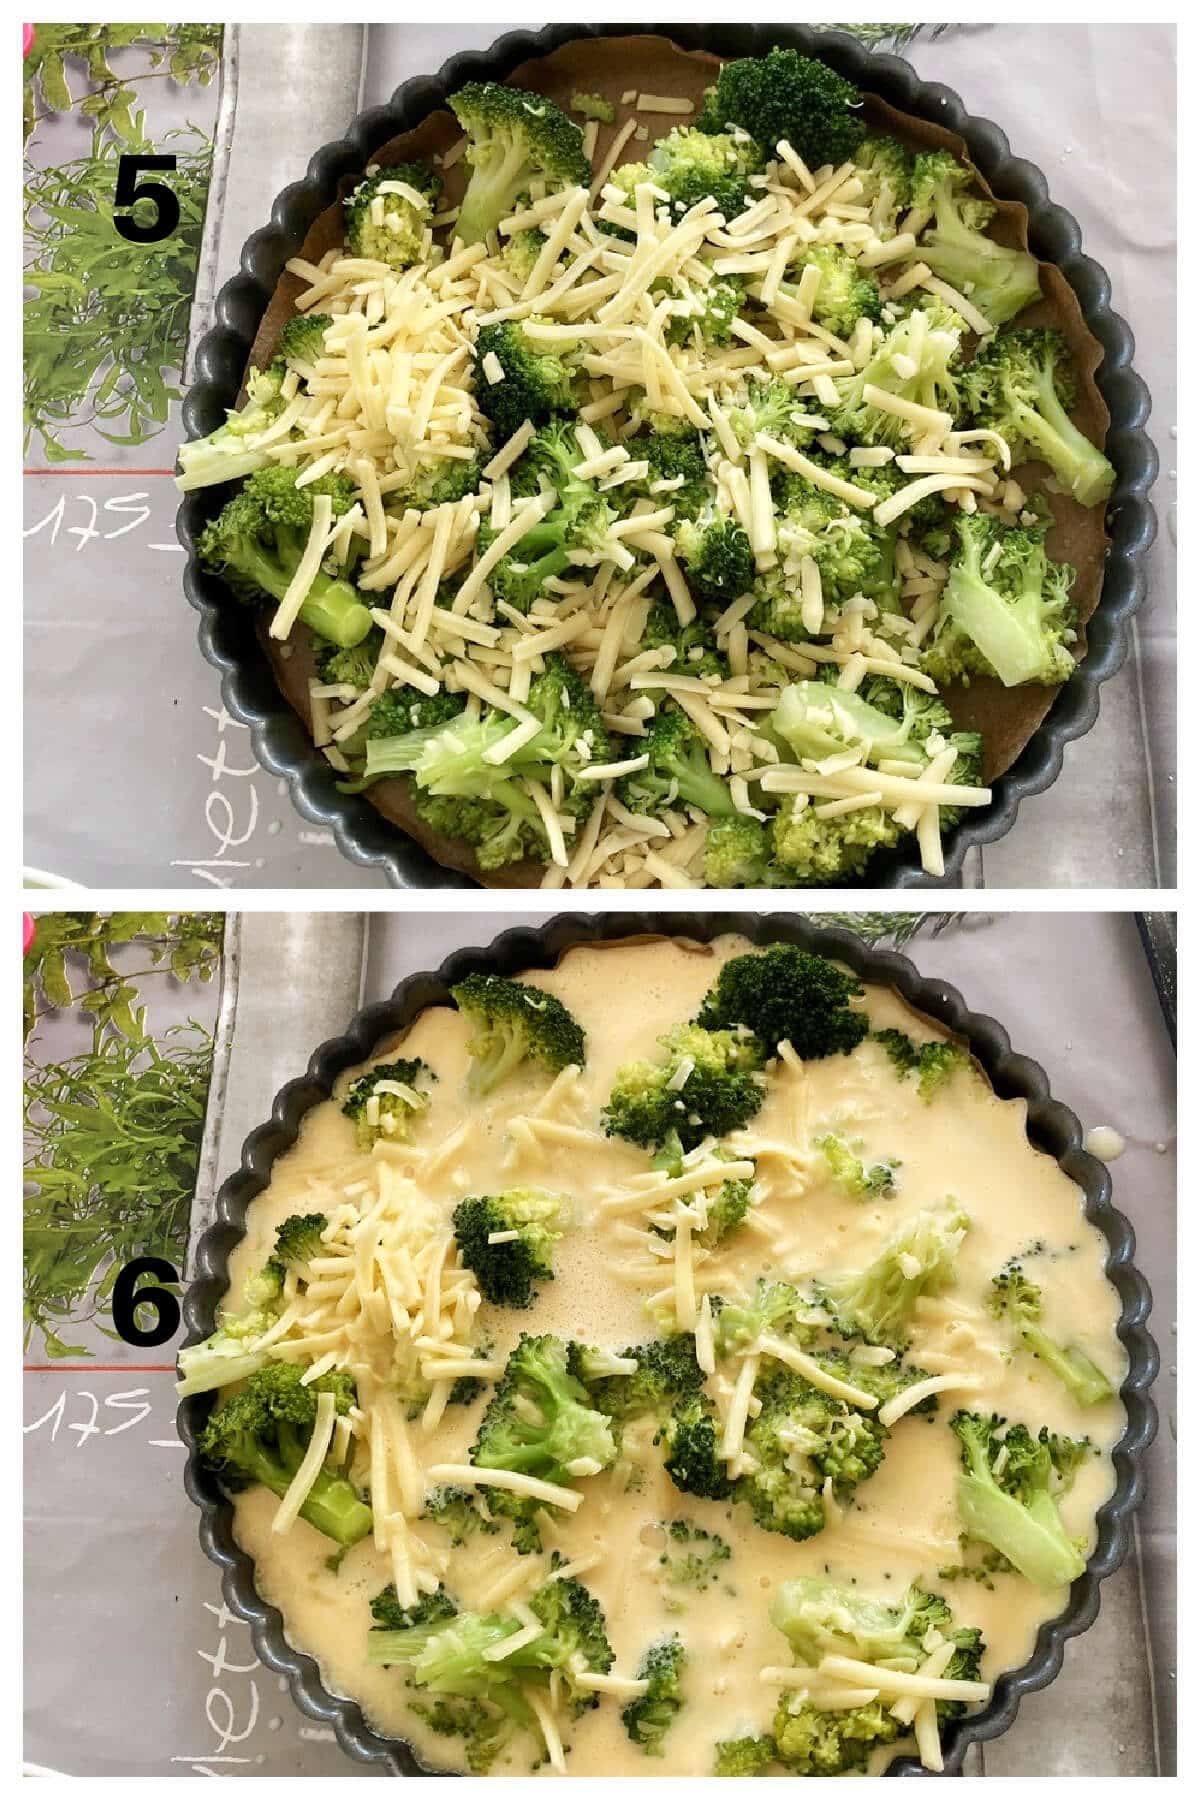 Collage of 2 photos to show how to make crustless quiche.